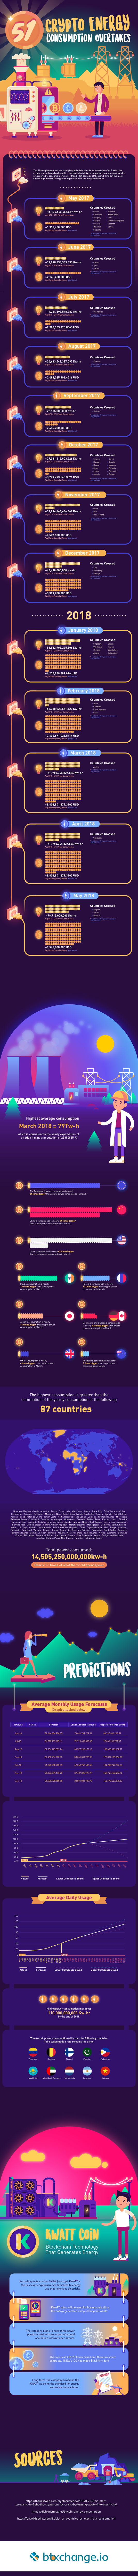 crypto energy consumption overtakes infographic